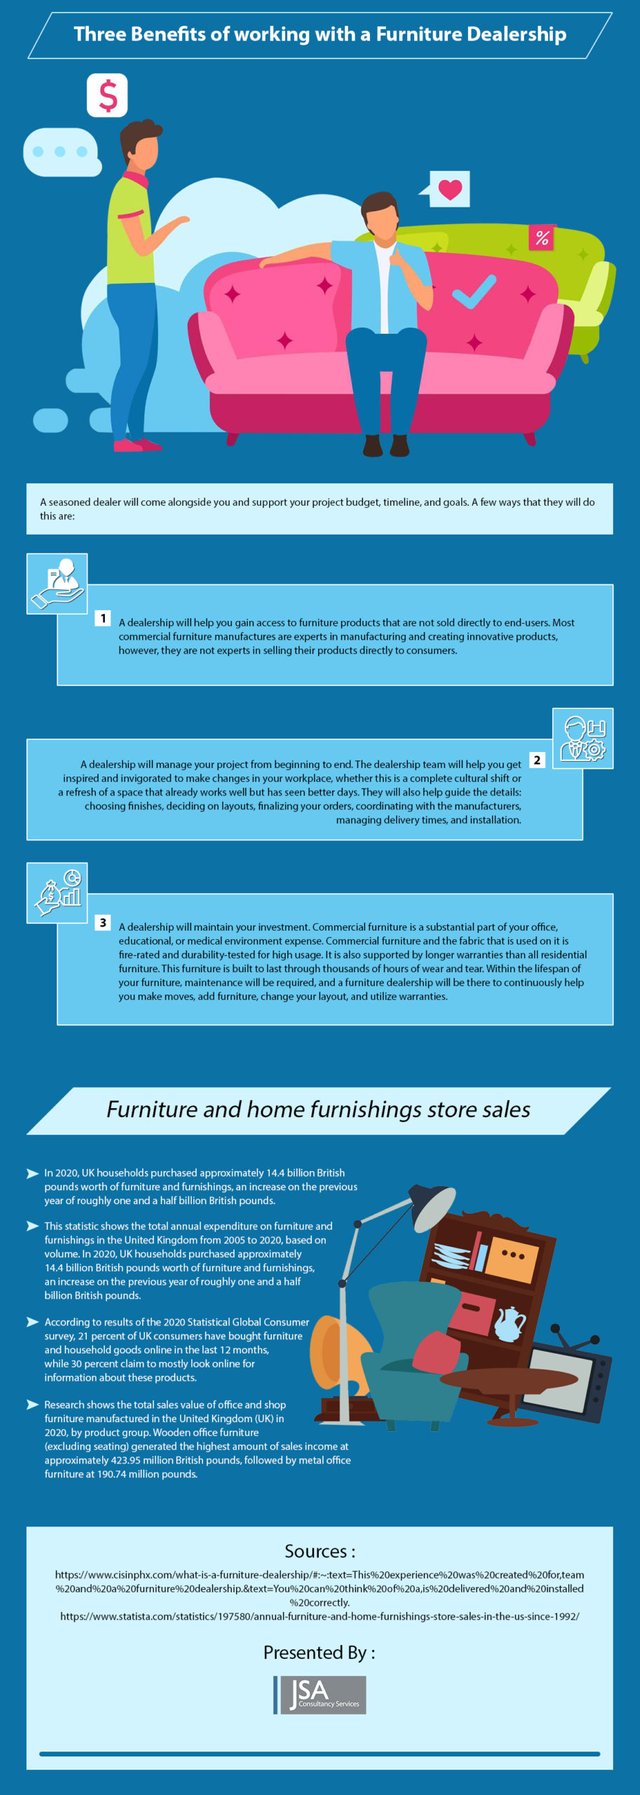 Infographic-Three-Benefits-of-working-with-a-Furniture-Dealership-scaled.jpg